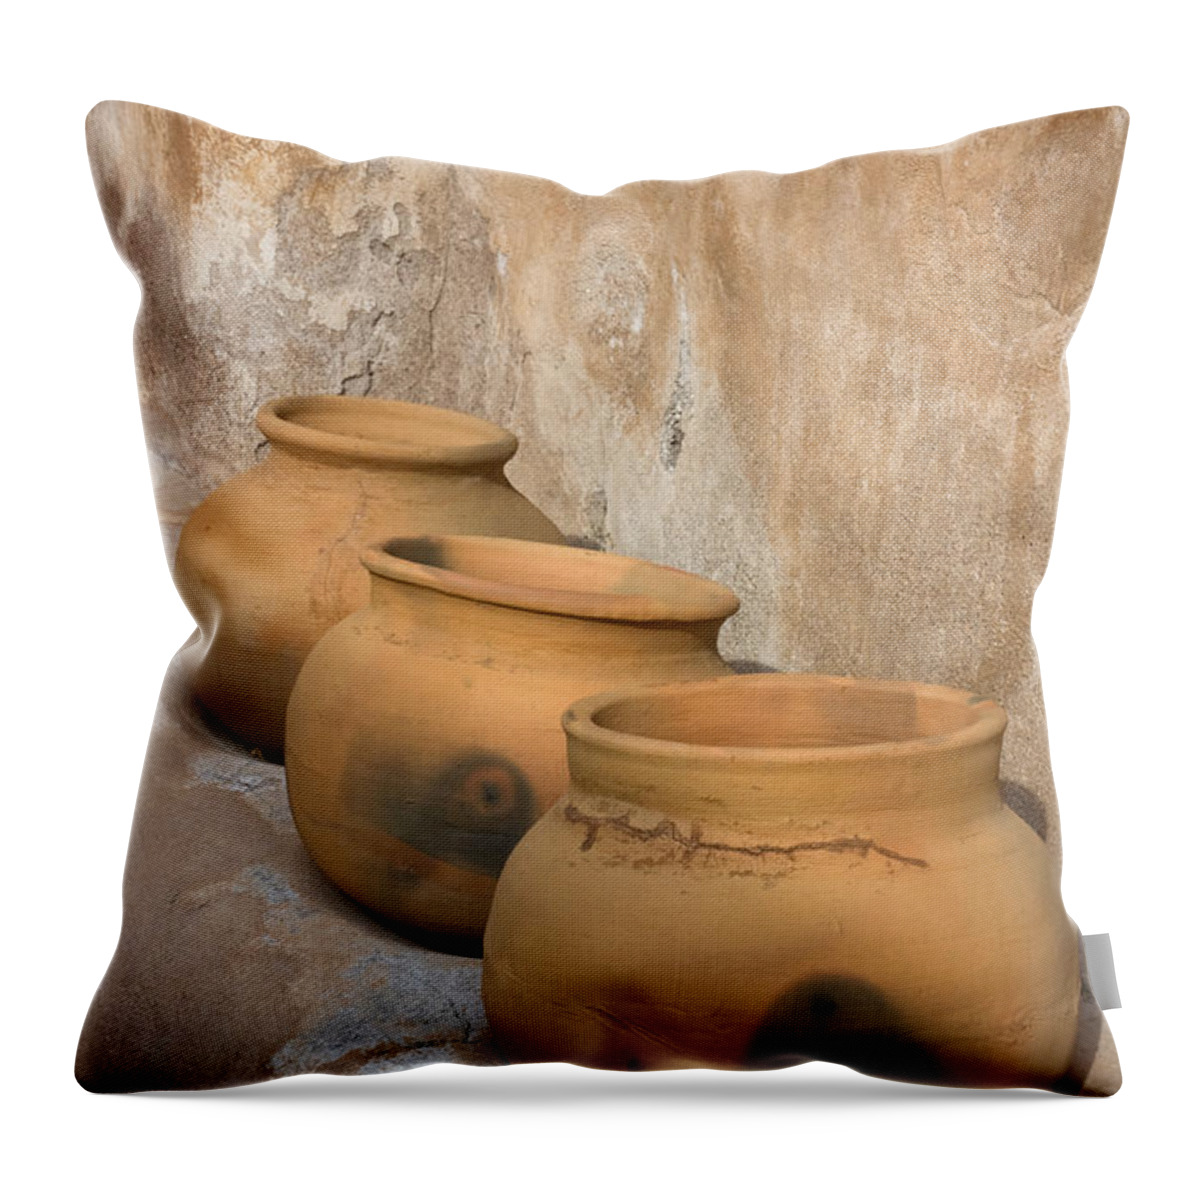 Mission San Jose De Tumacacori Throw Pillow featuring the photograph Clay Pots by Richard and Ellen Thane